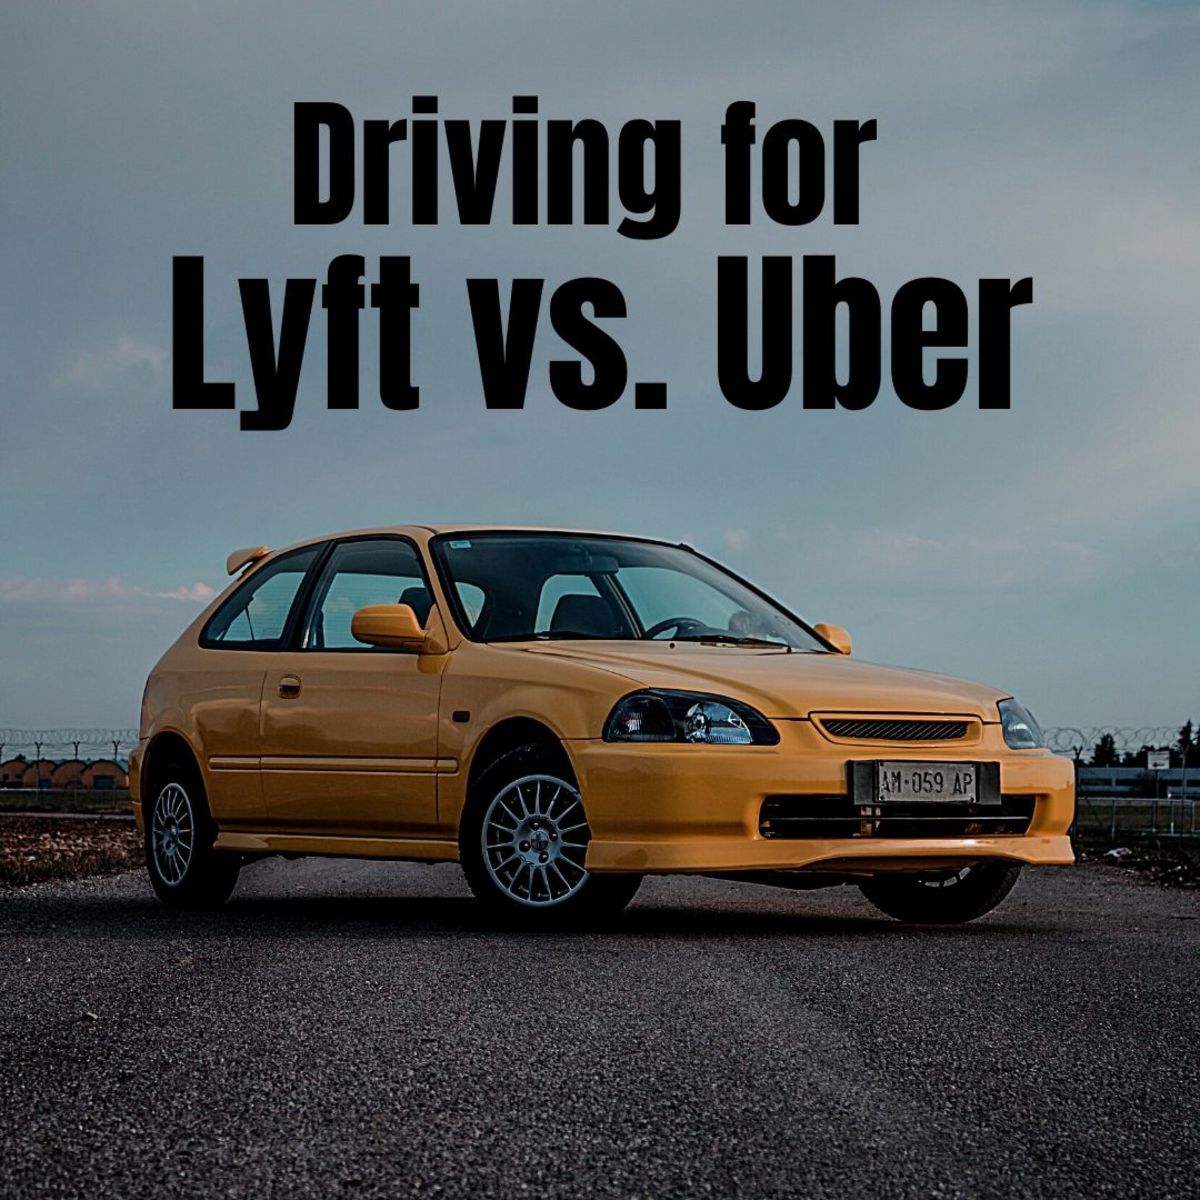 Explore the pros and cons of Lyft and Uber